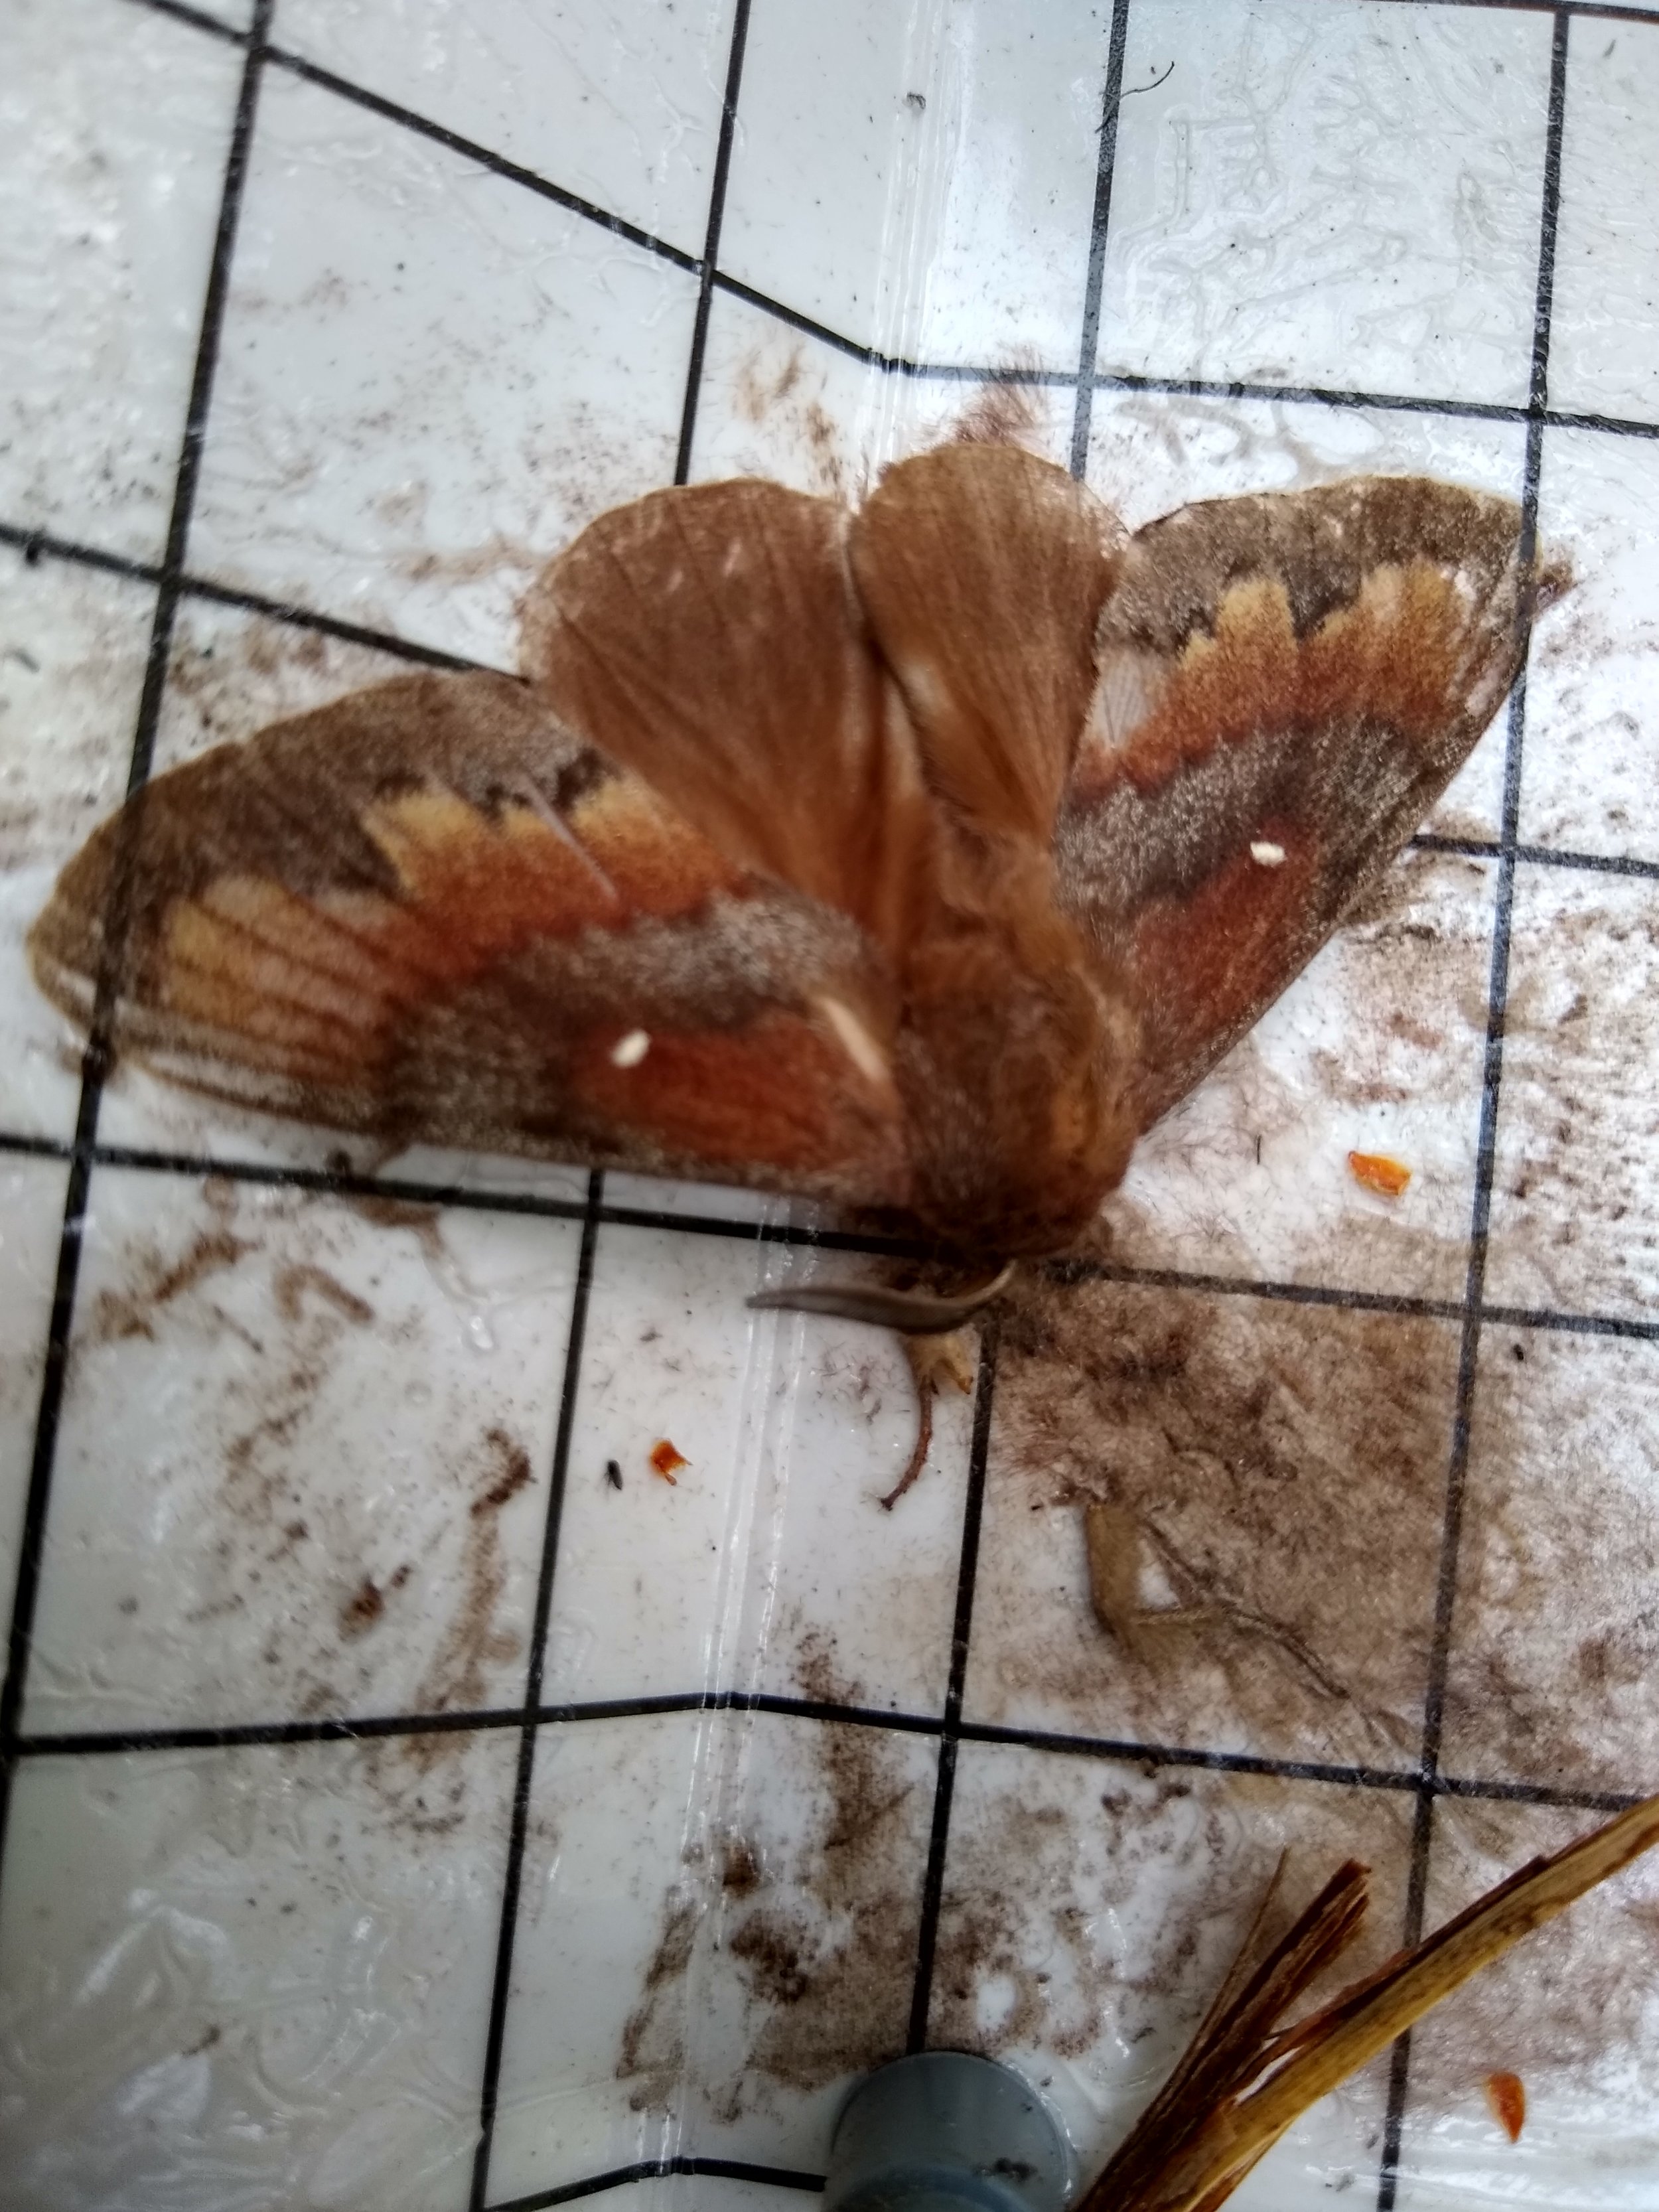 A Pine tree lappet moth meets its sticky end